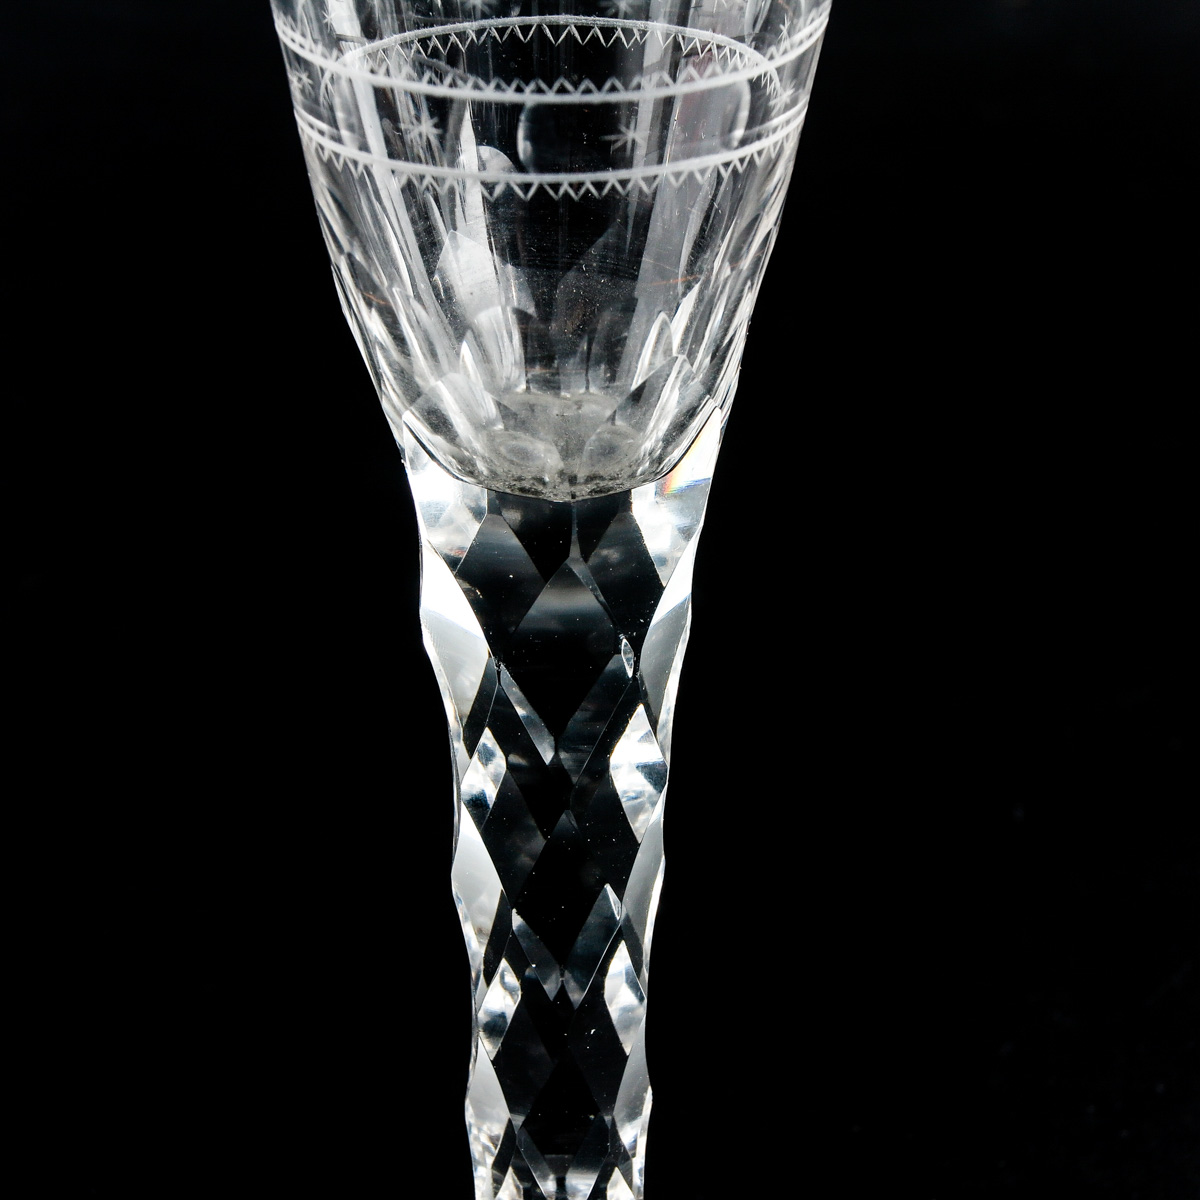 A Set of 3 19th Century Cut Crystal Wine Glasses - Image 7 of 8